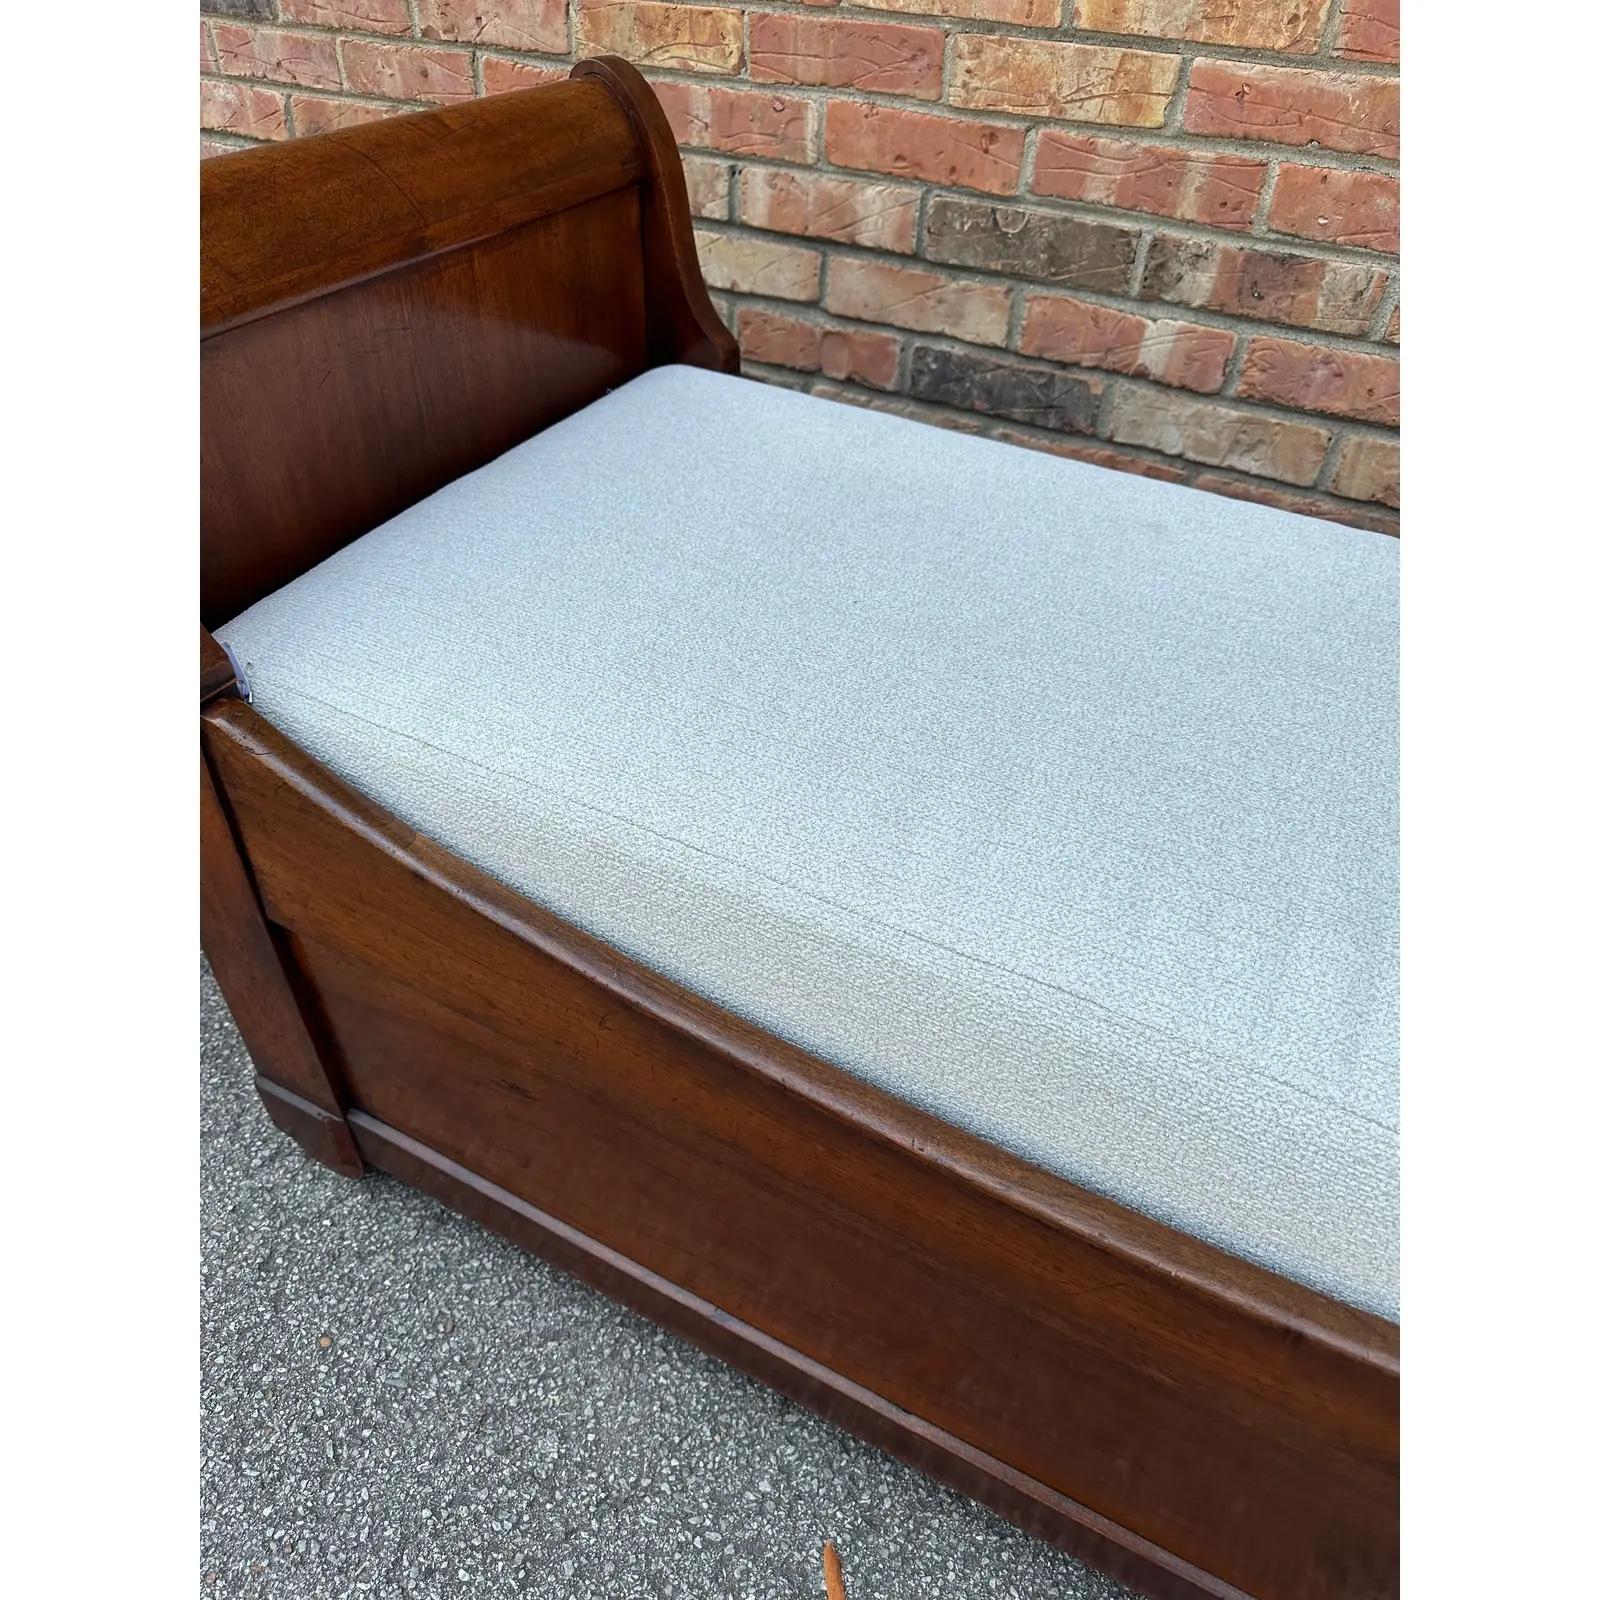 This is such a beautiful antique French day bed! The design is simple but so appealing with its curved edges and sleigh bed style. The wood is dark and glossy with lovely natural detail, and the cushion has been newly upholstered with a white